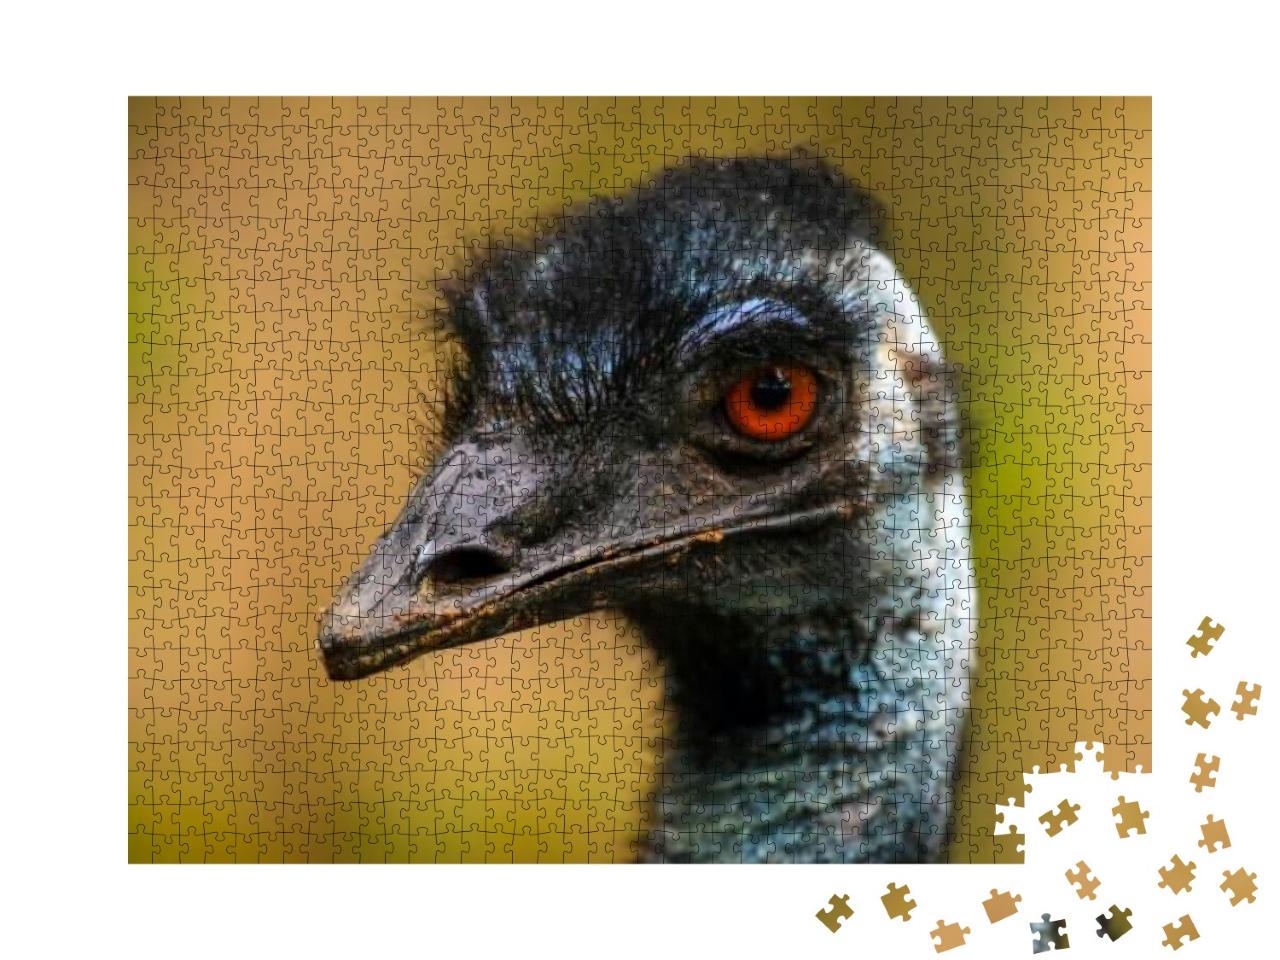 Close Up Portrait of Emus Showing Beak & Head on a Blurre... Jigsaw Puzzle with 1000 pieces